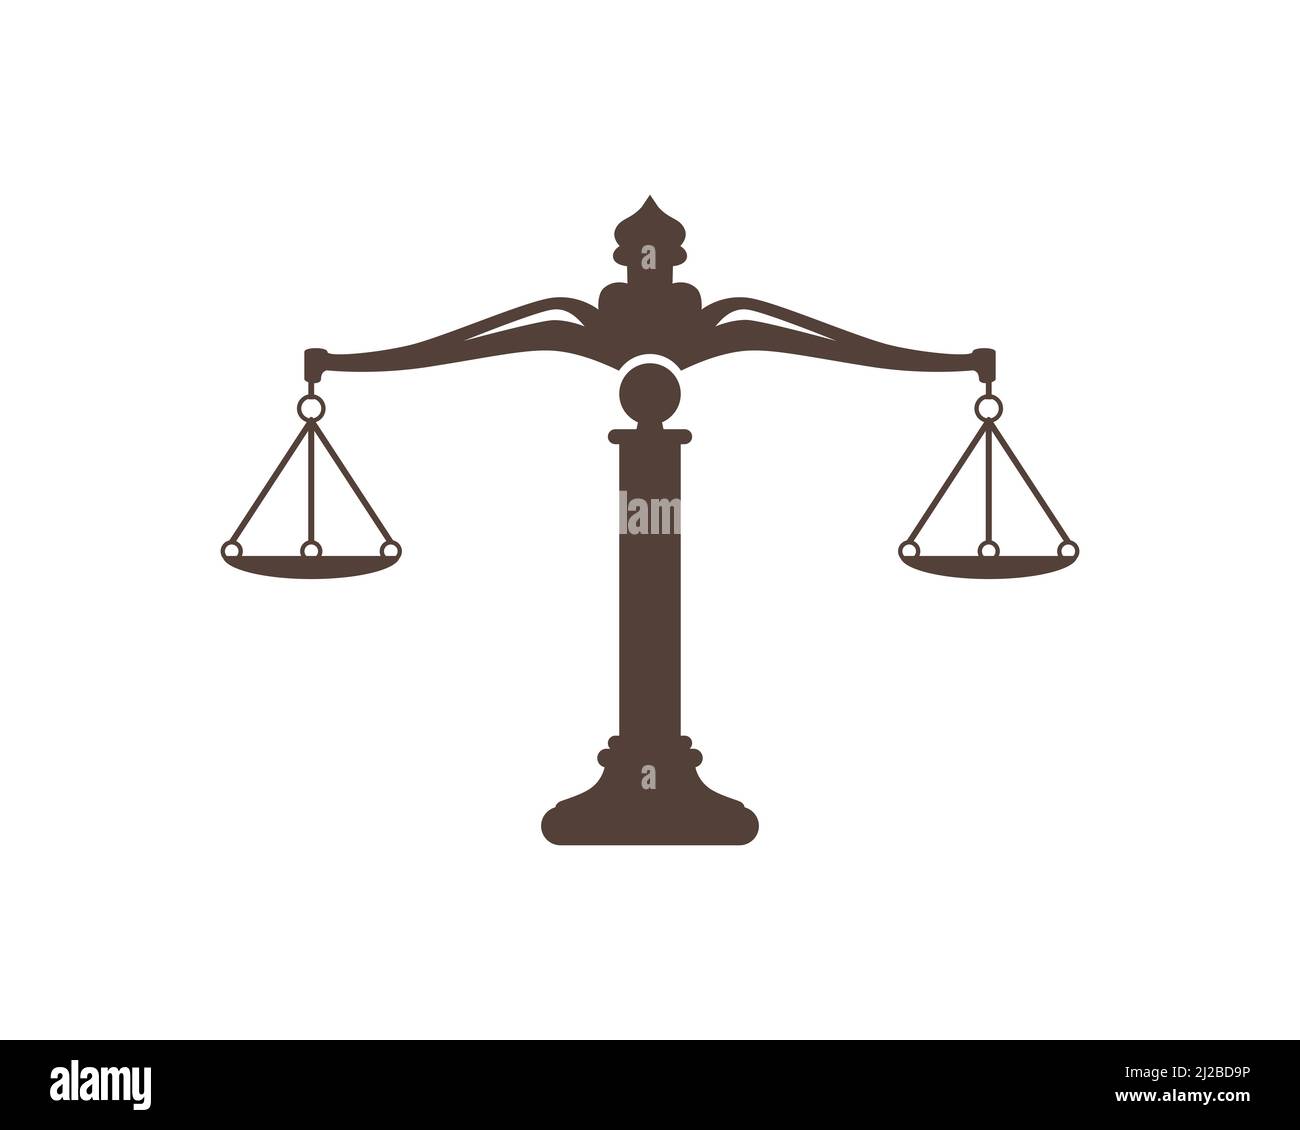 Justice, Judgement, Law Firm, Lawyer and Law Consultant Symbol Stock Vector